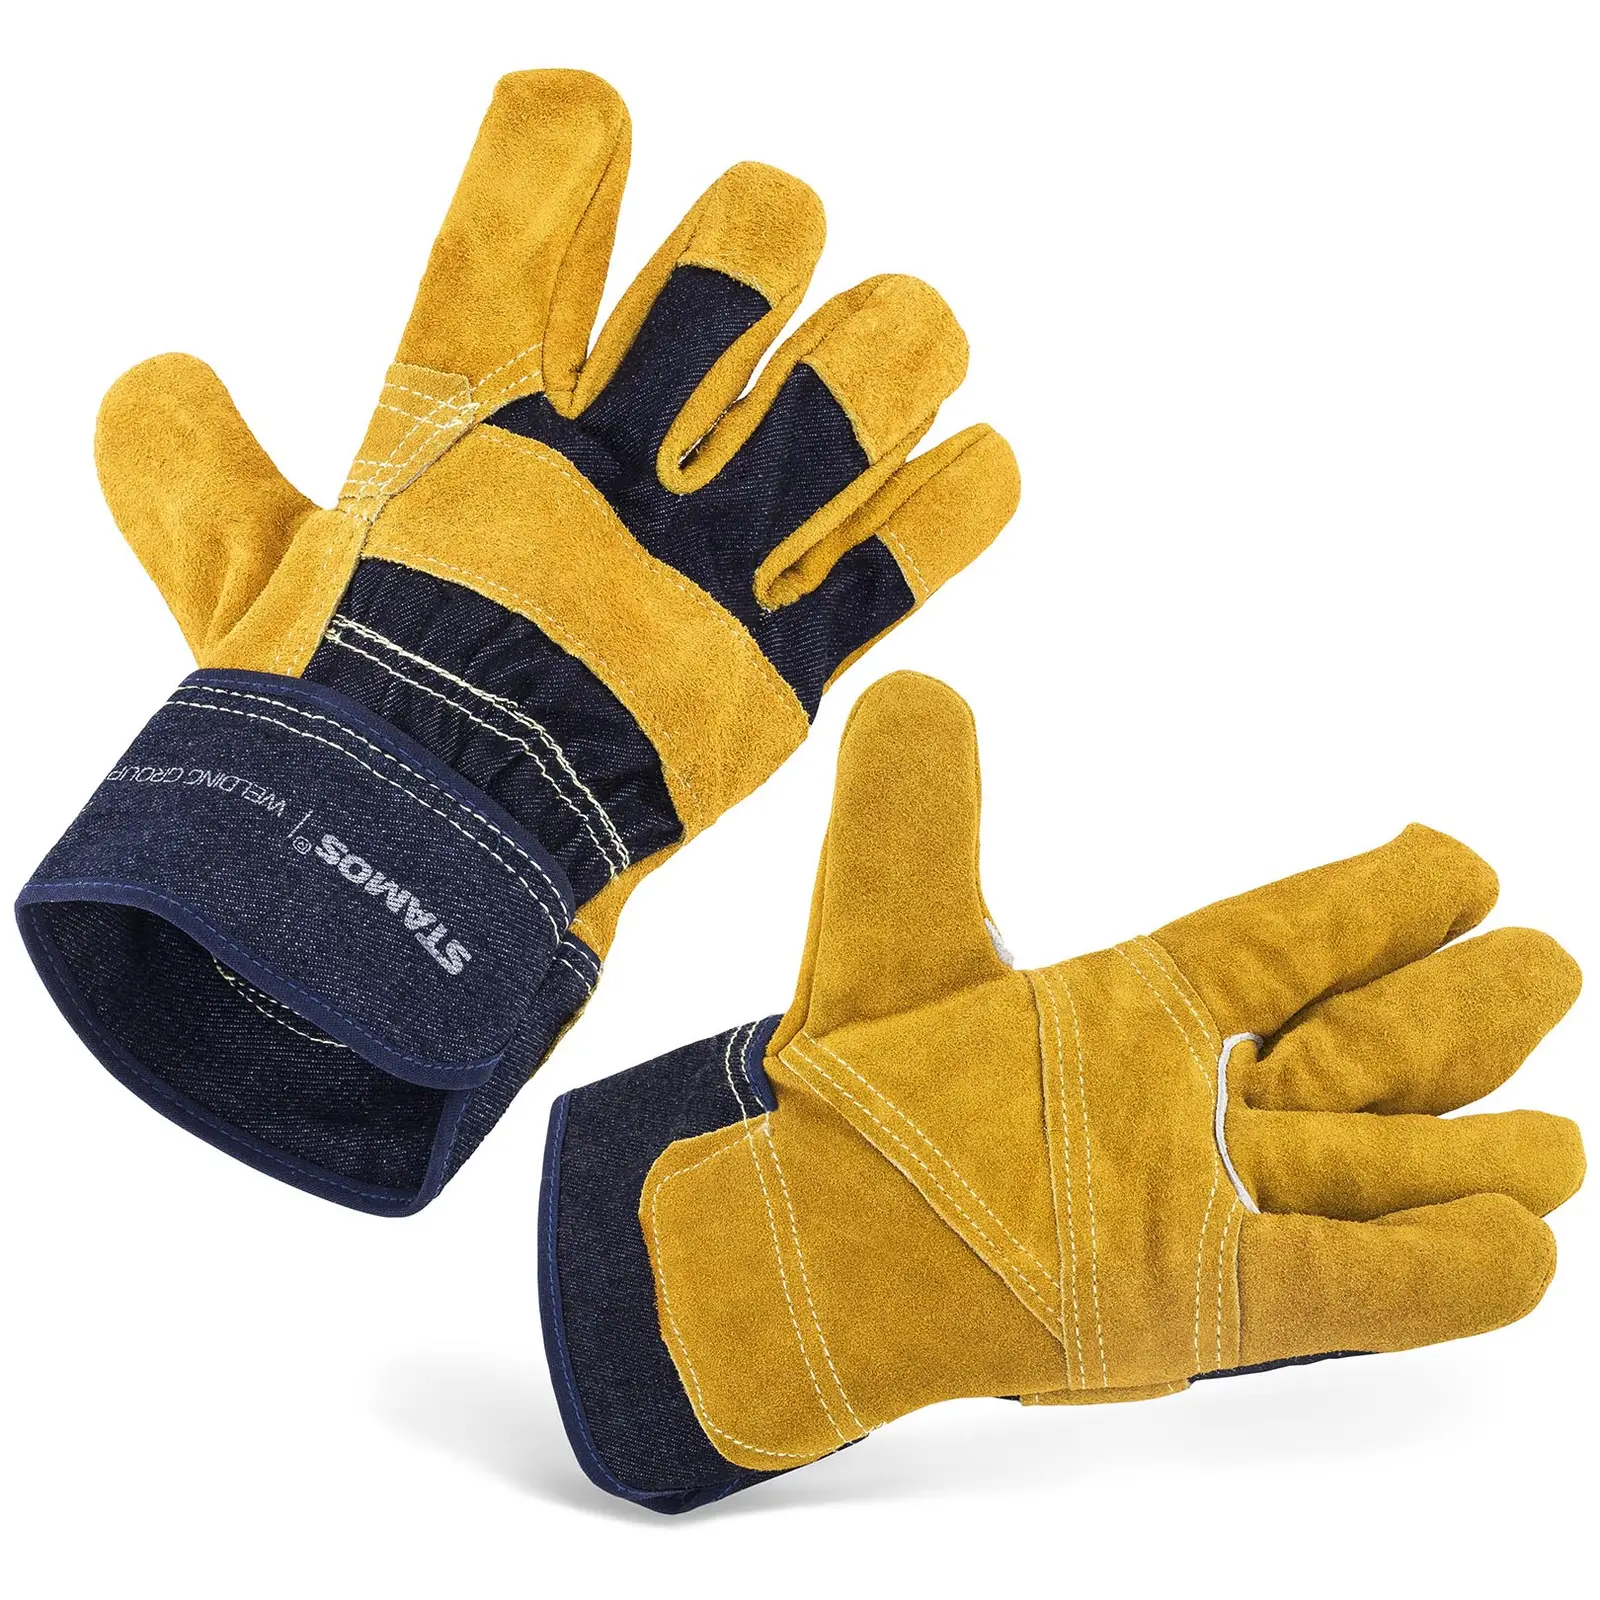 Work gloves - size. XXL - lined